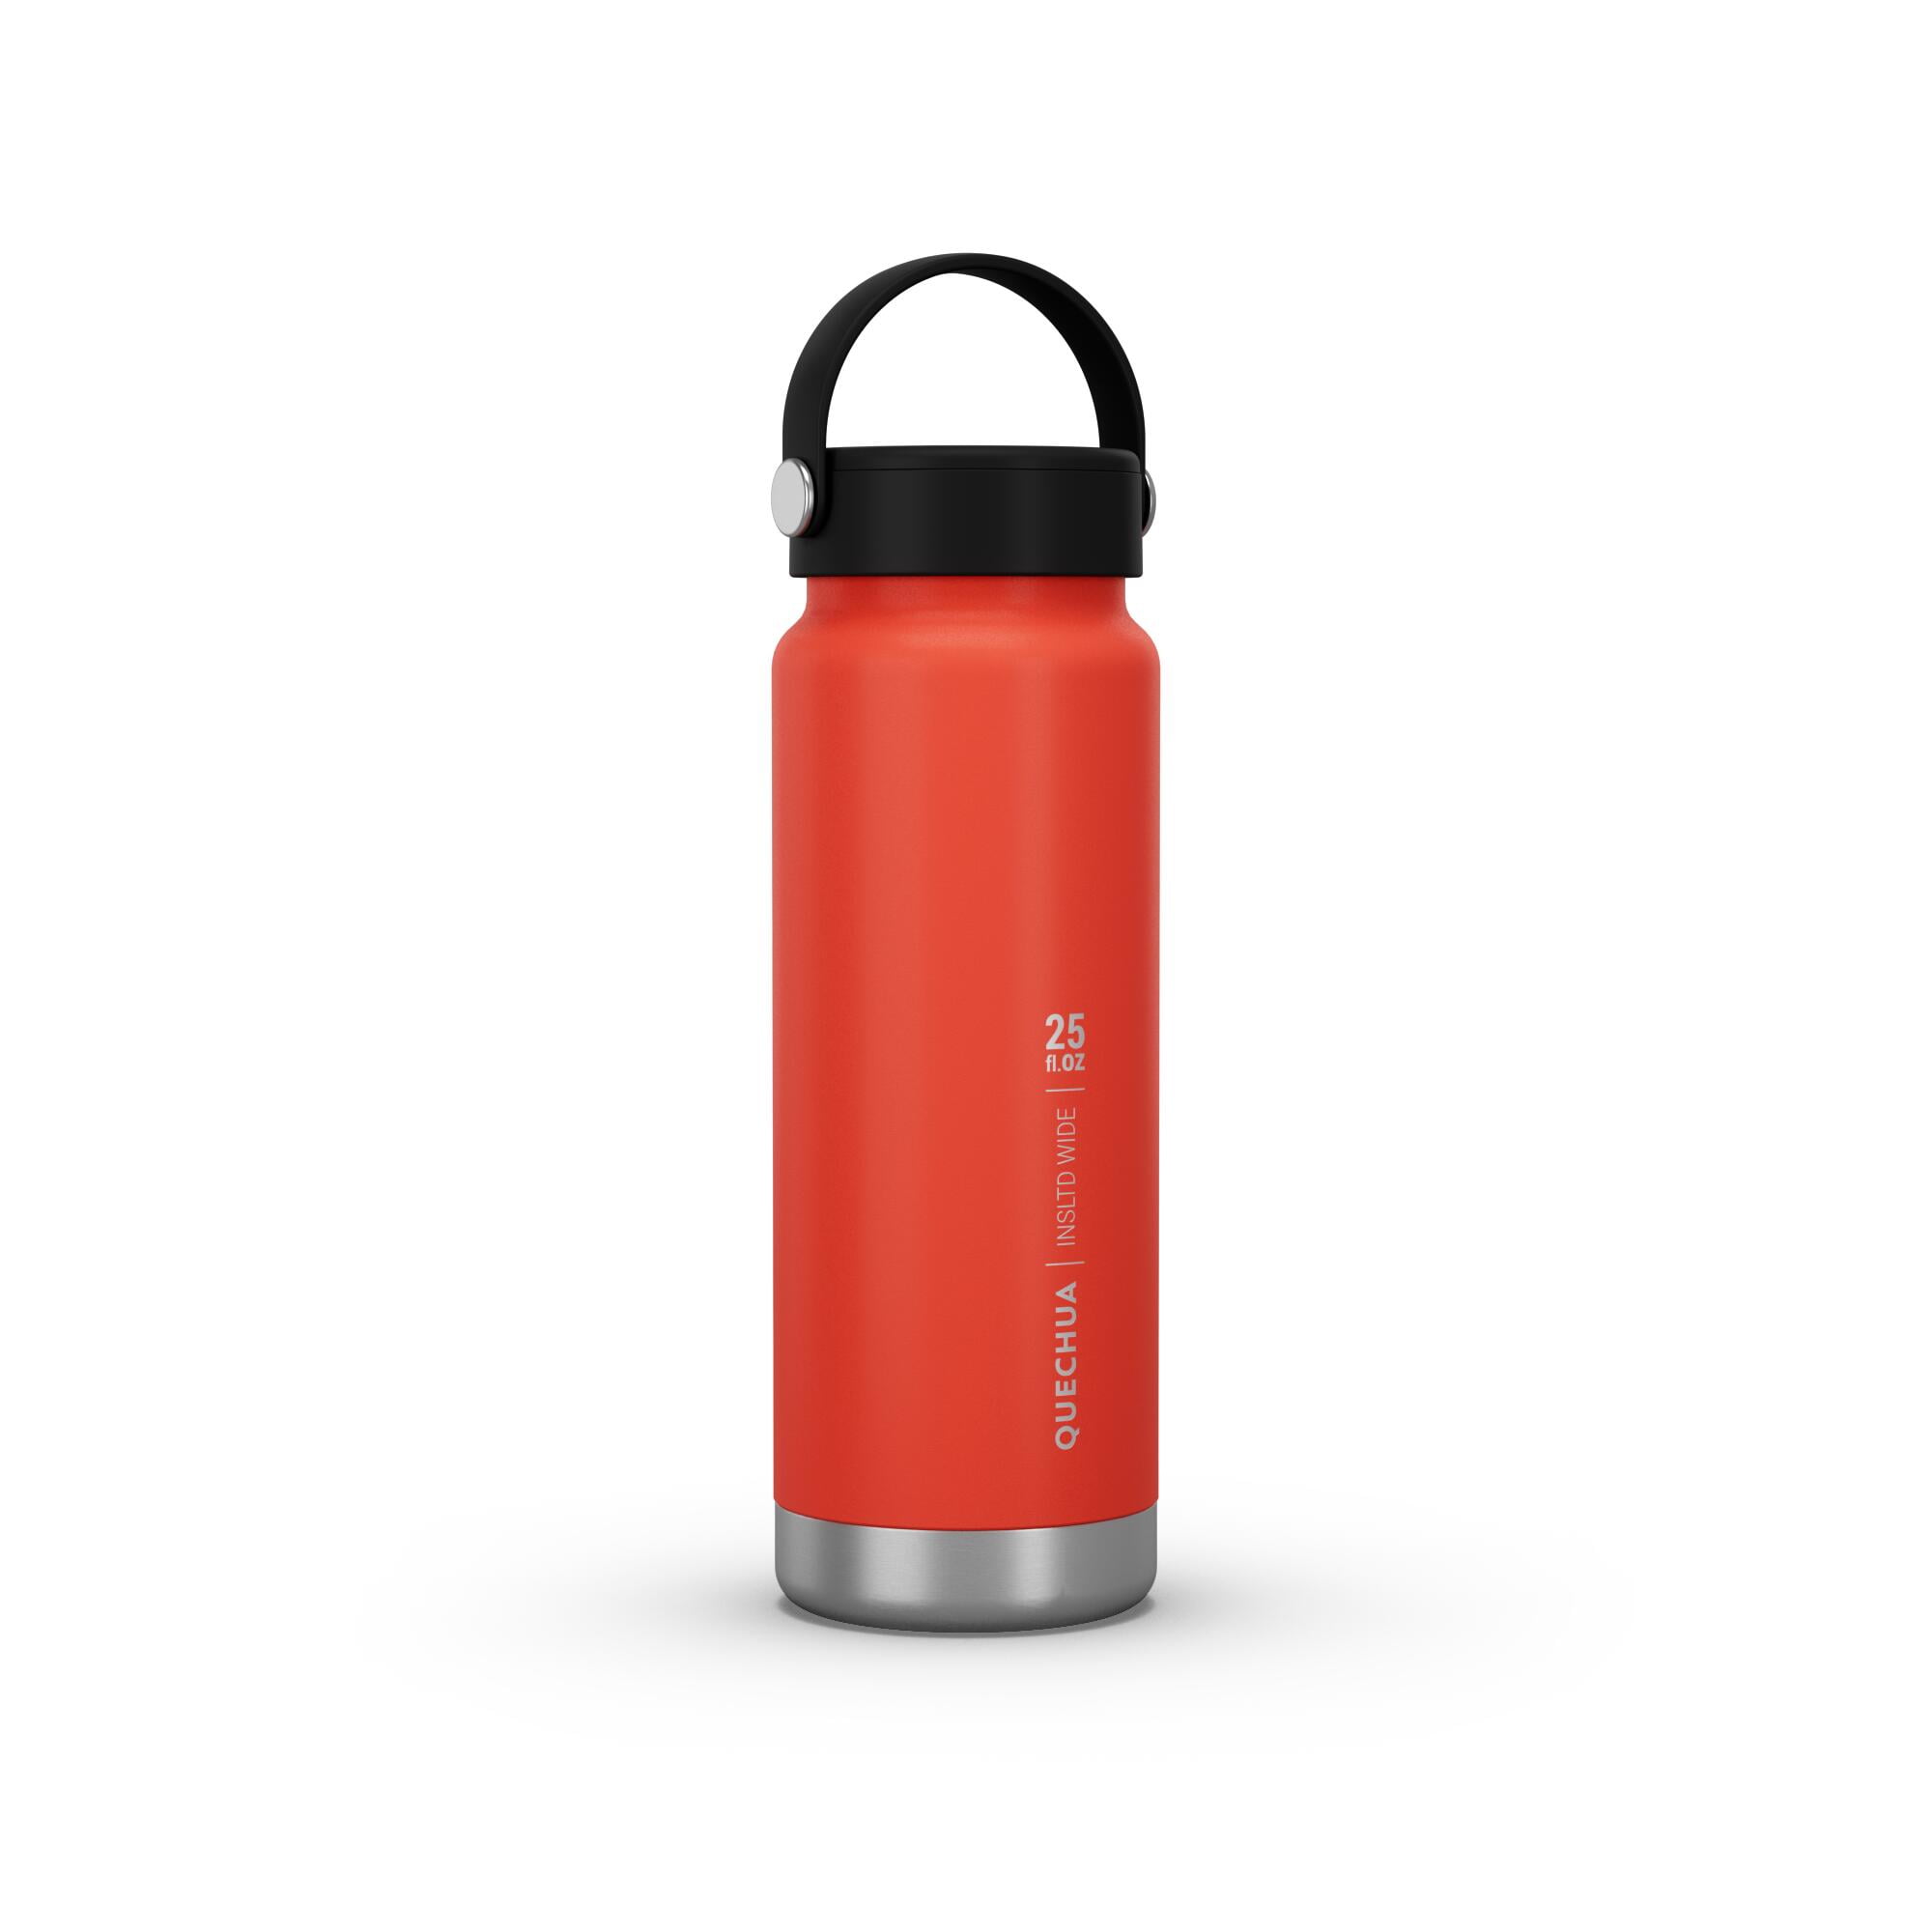 25-Oz Decathlon Quechua Stainless Steel Wide Opening Double Wall Insulated Water Bottle (Orange) $4.33 + Free Shipping w/ Walmart+ or on $35+